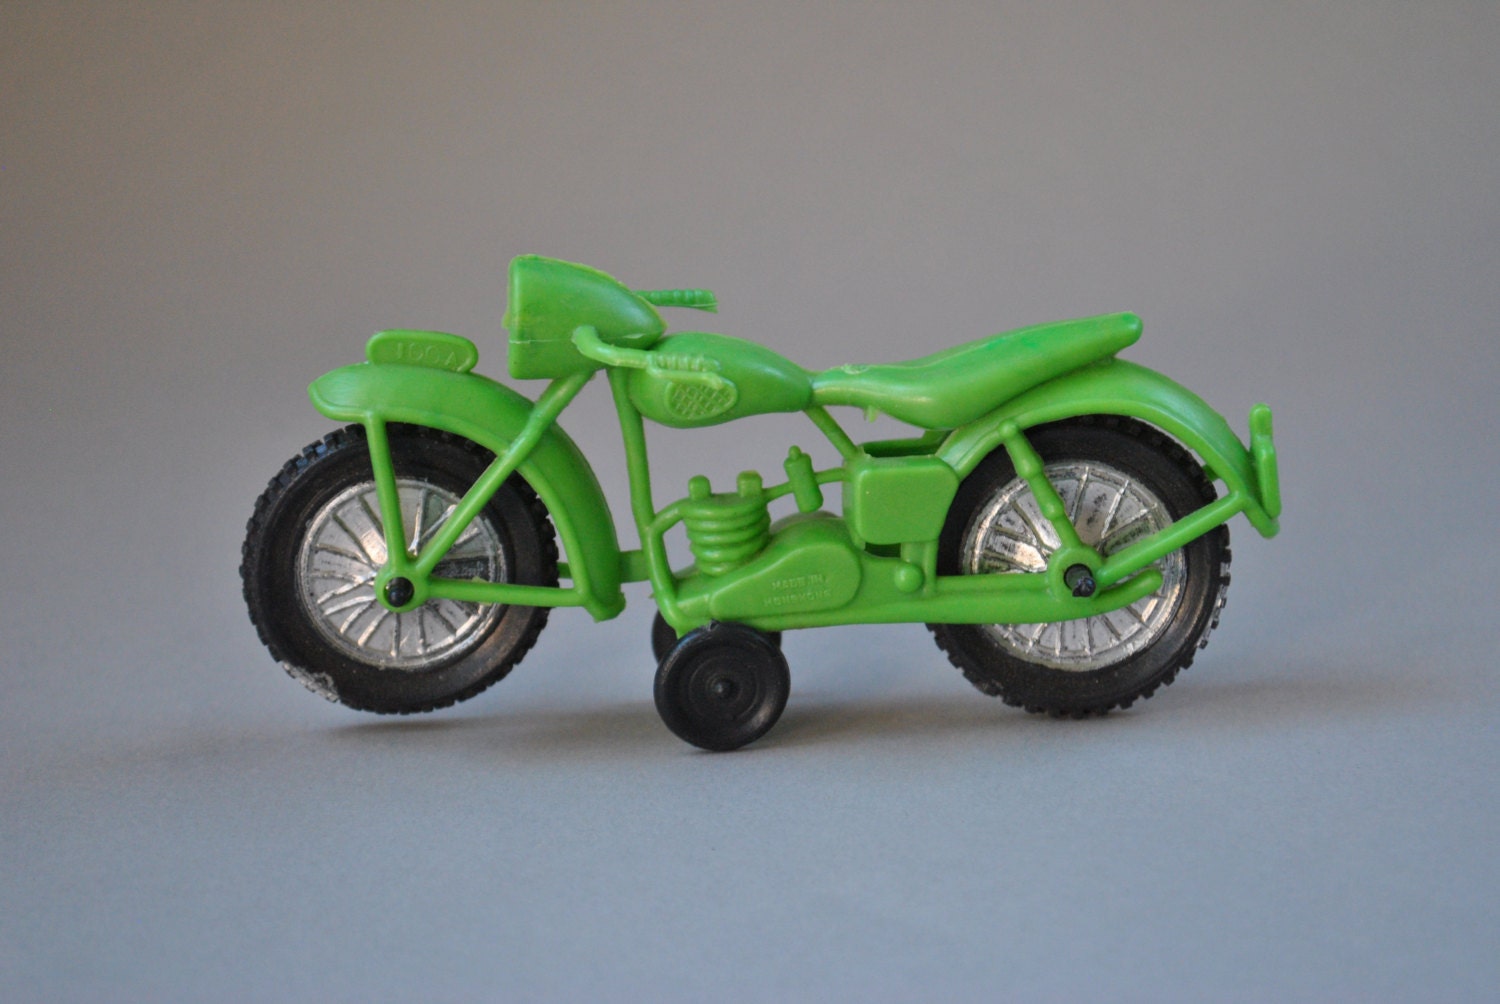  Vintage  1970 s Green Plastic  Motorcycle  Toy Made in Hong